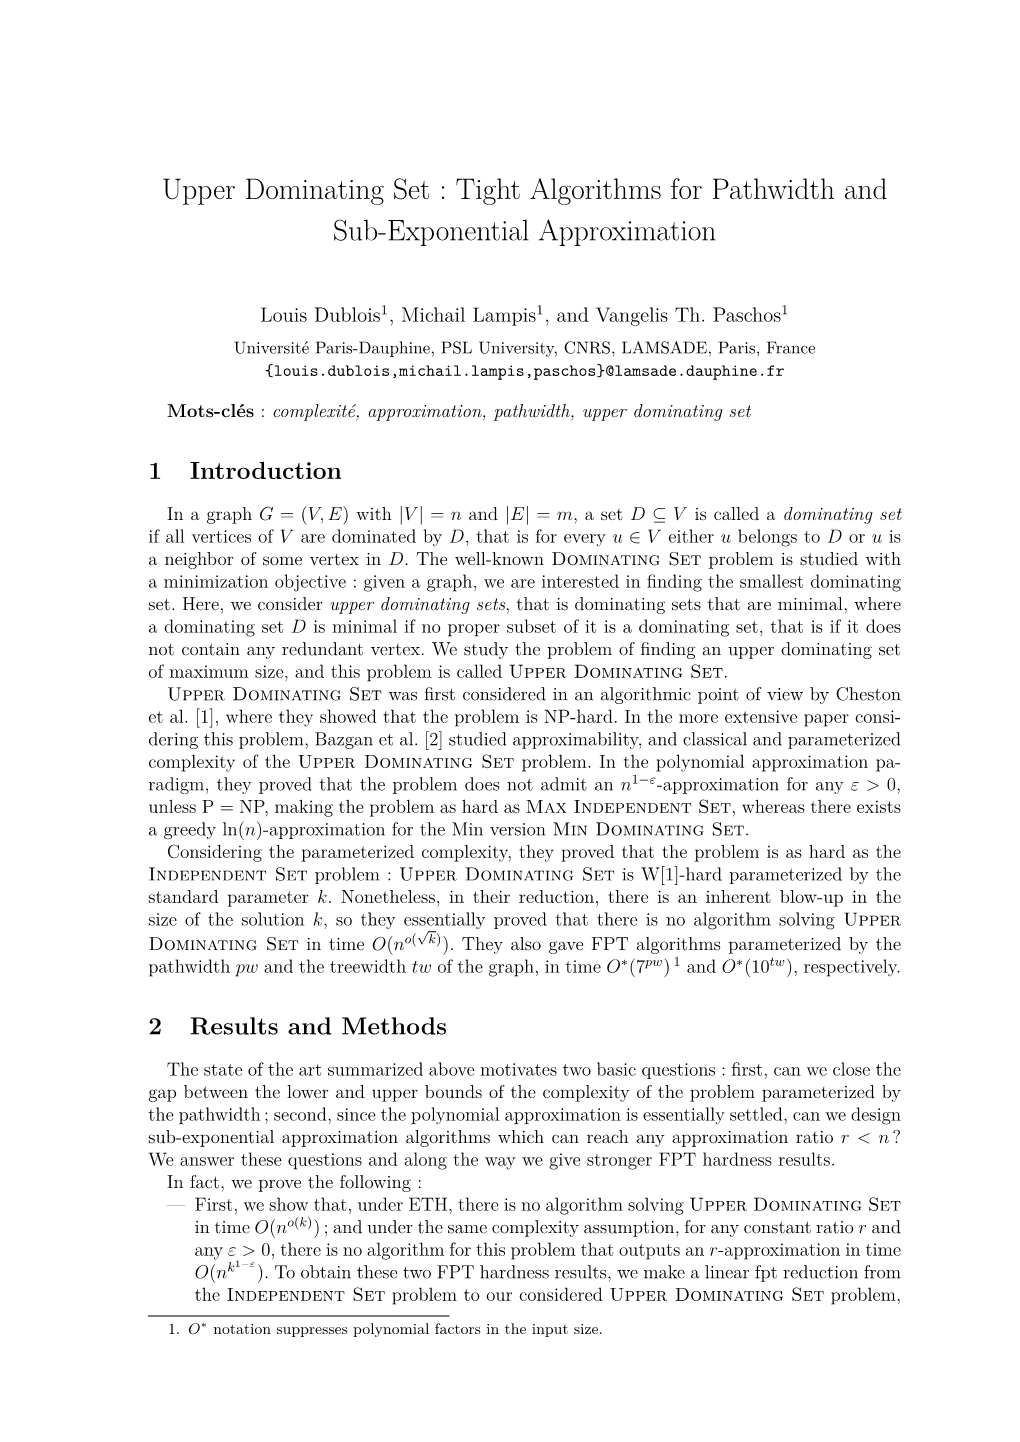 Upper Dominating Set : Tight Algorithms for Pathwidth and Sub-Exponential Approximation